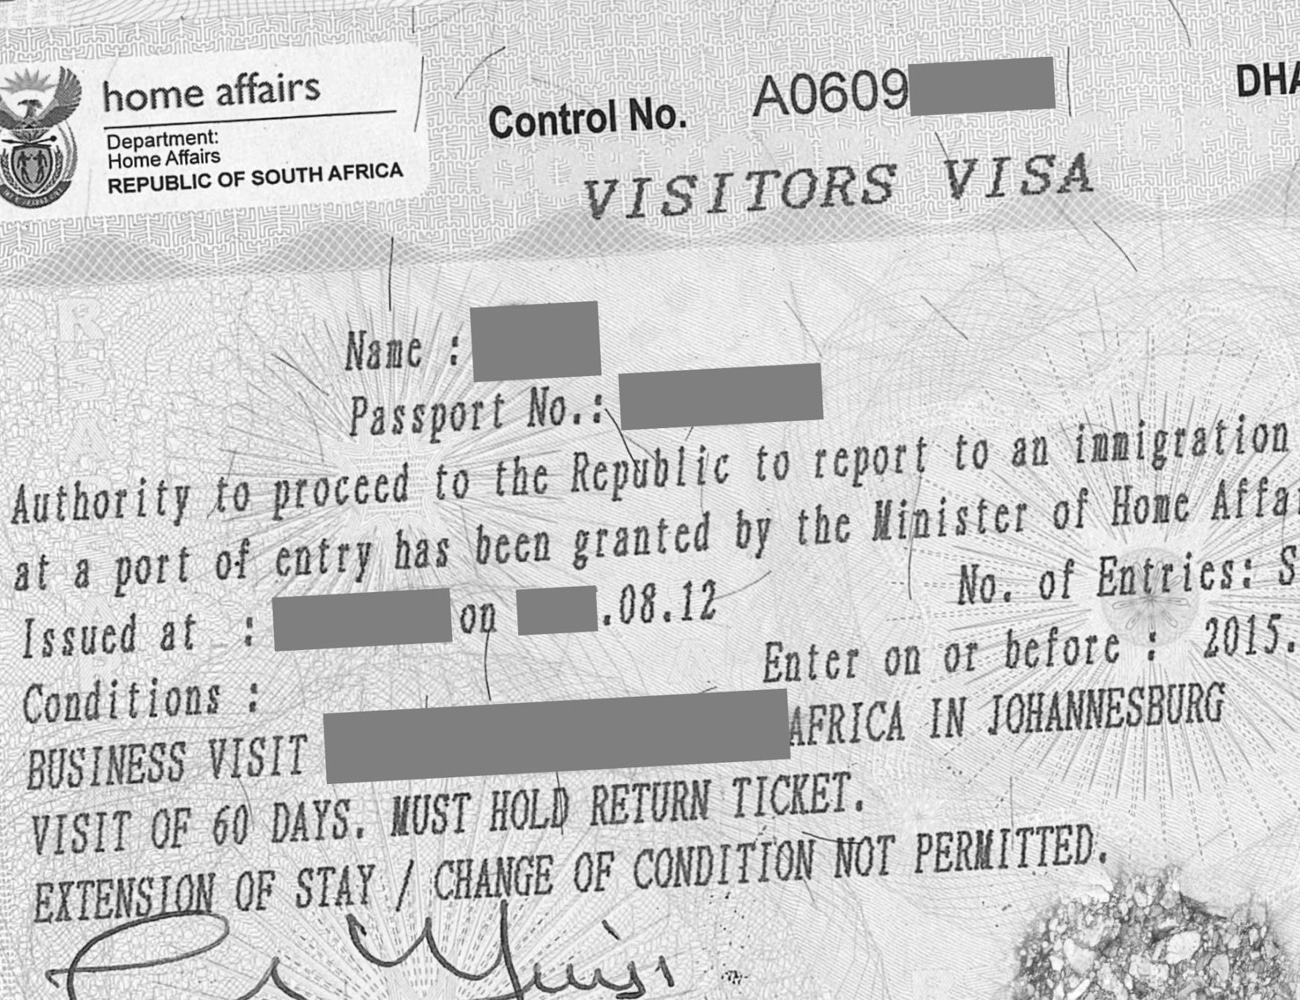 A South African Visitor's Visa